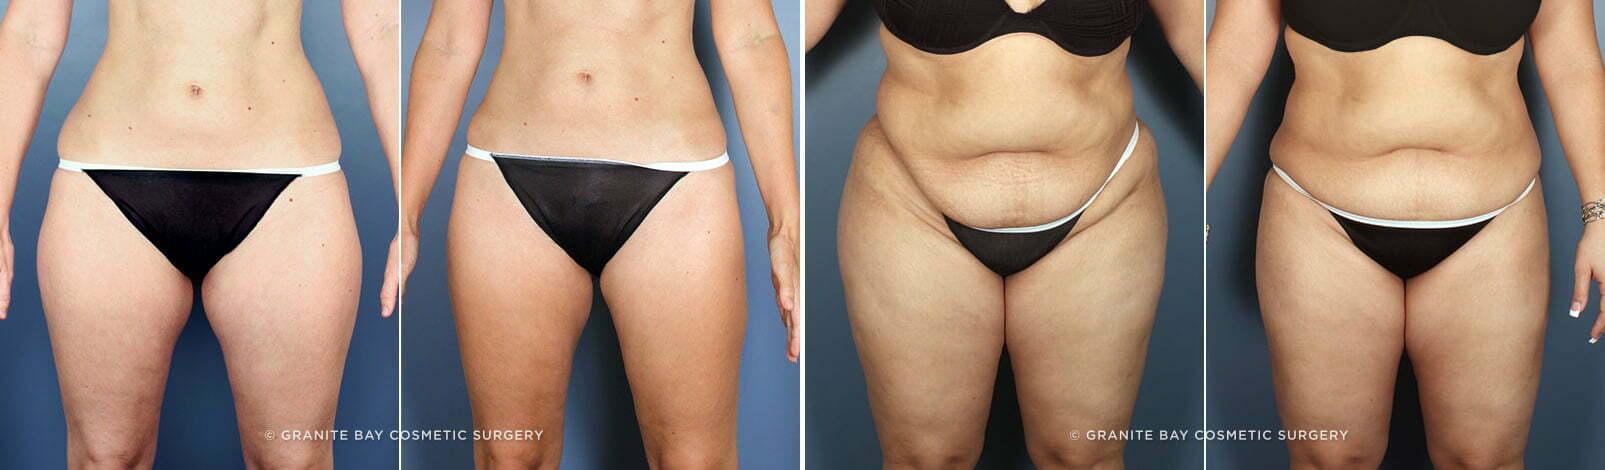 Cosmetic Surgery by Body Type